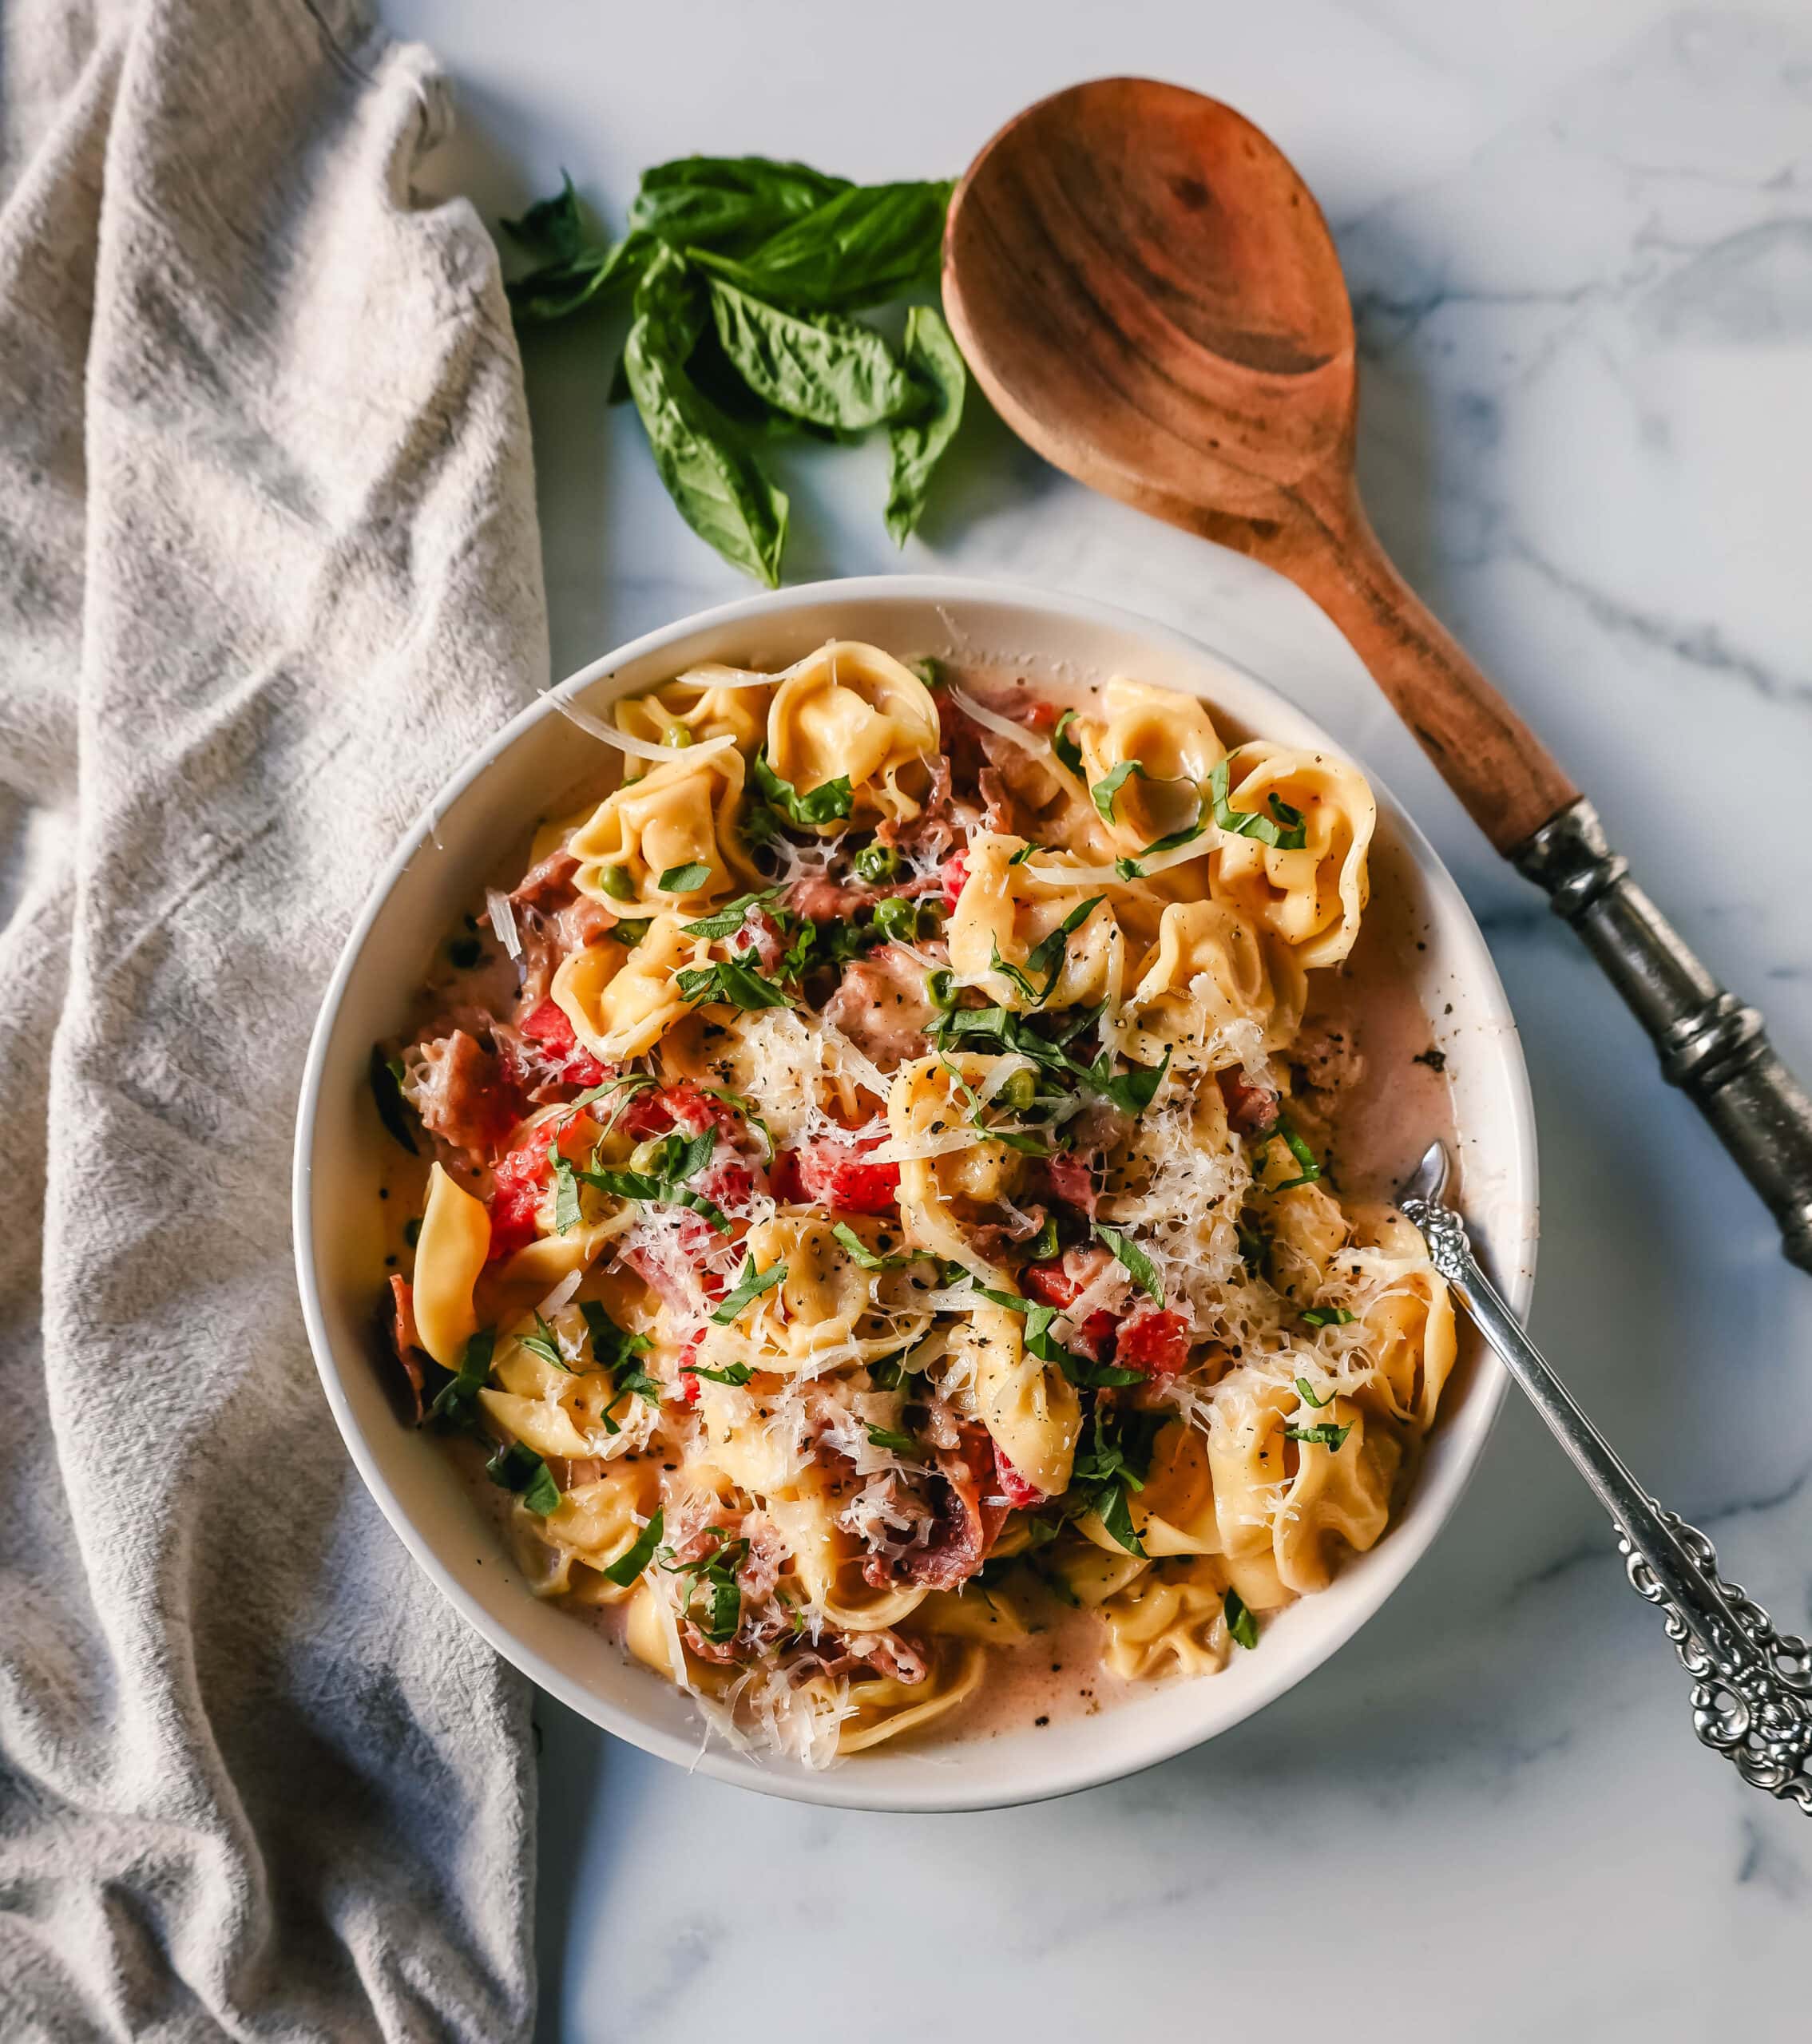 Creamy Tortellini with Prosciutto and Peas is made with cheese tortellini, crispy prosciutto, heavy cream, parmesan cheese, tomatoes, and peas. This Tortellini Ai Formaggio is such a popular tortellini pasta dish.